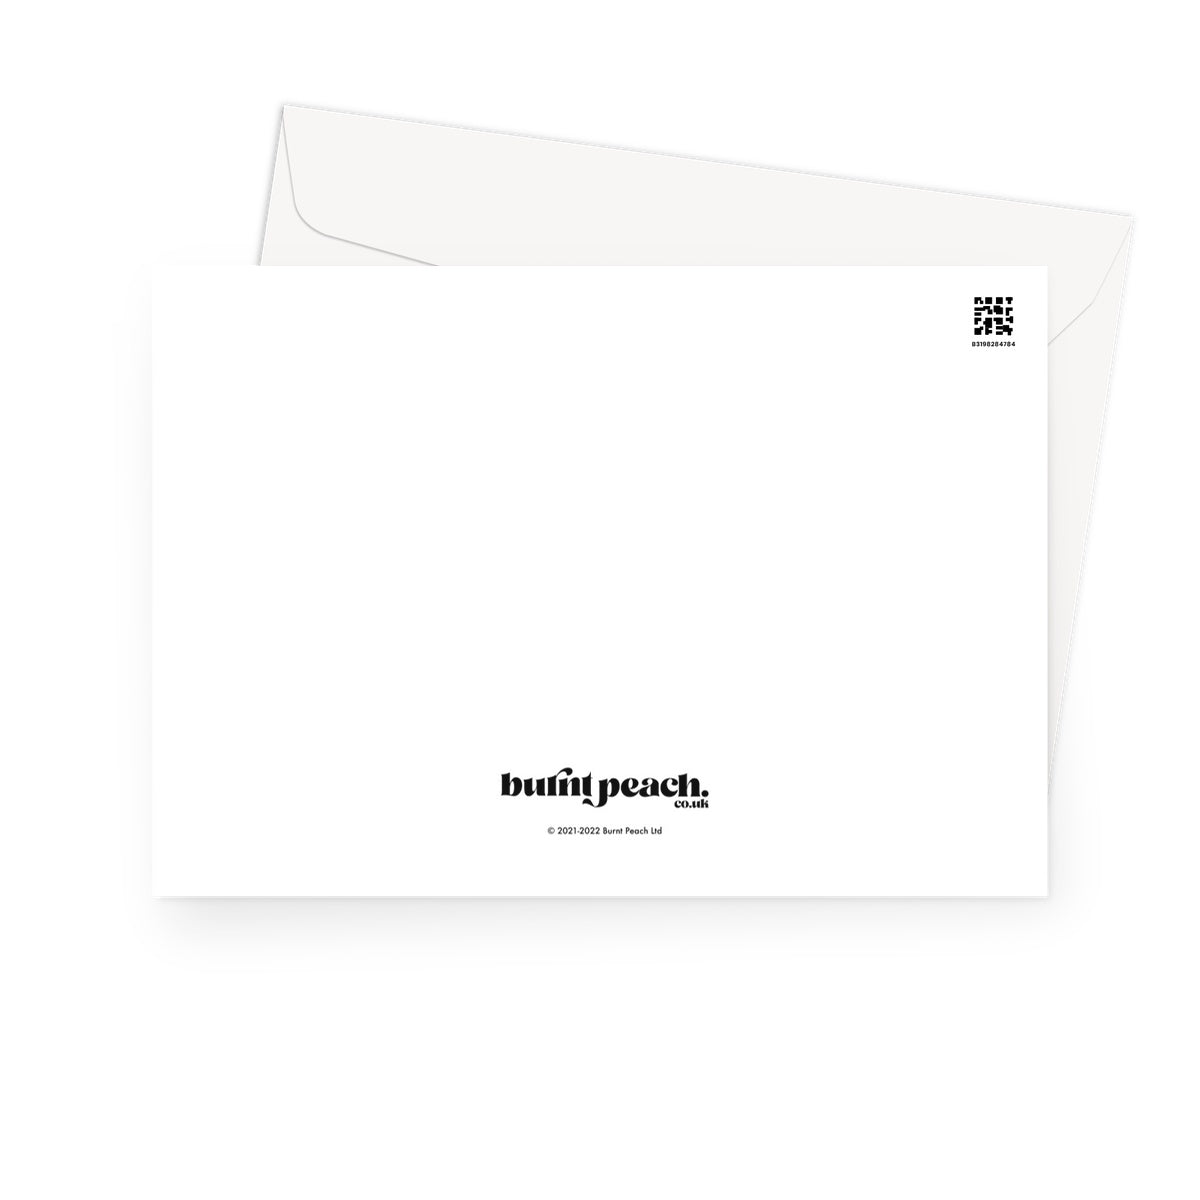 IMPOSSIBLE - Soft Black / White Greeting Card